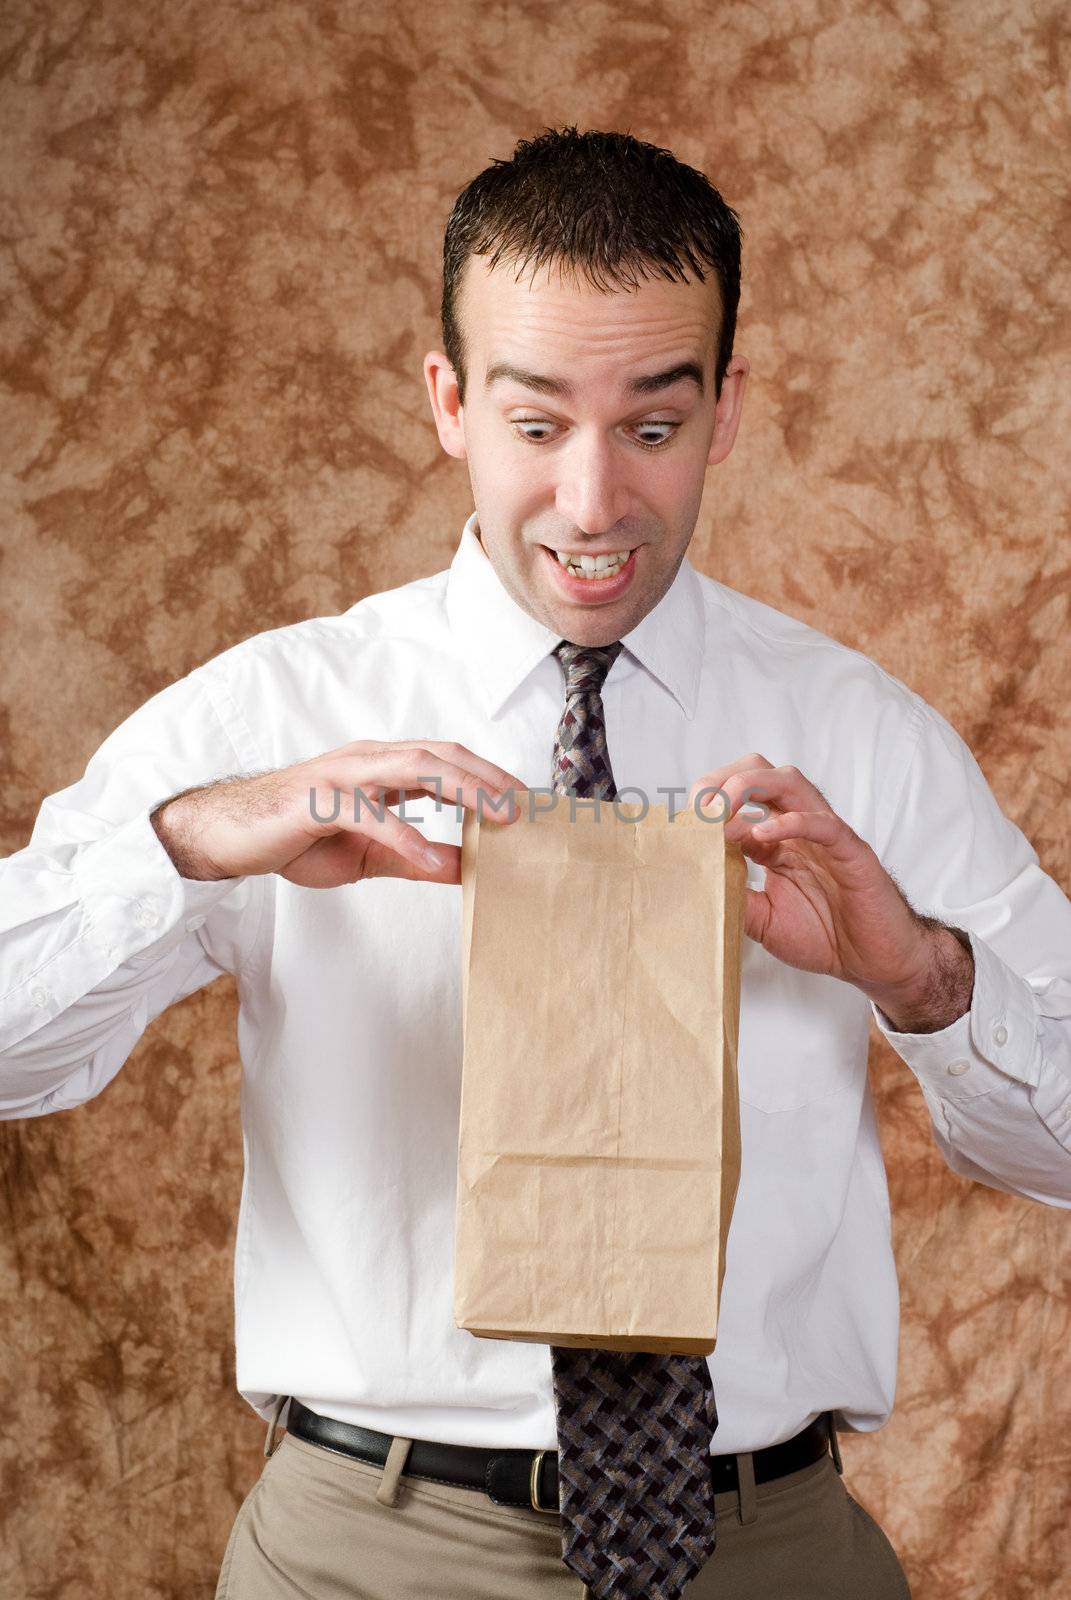 An employee wearing a tie is looking happy about what he sees in his paper lunch bag